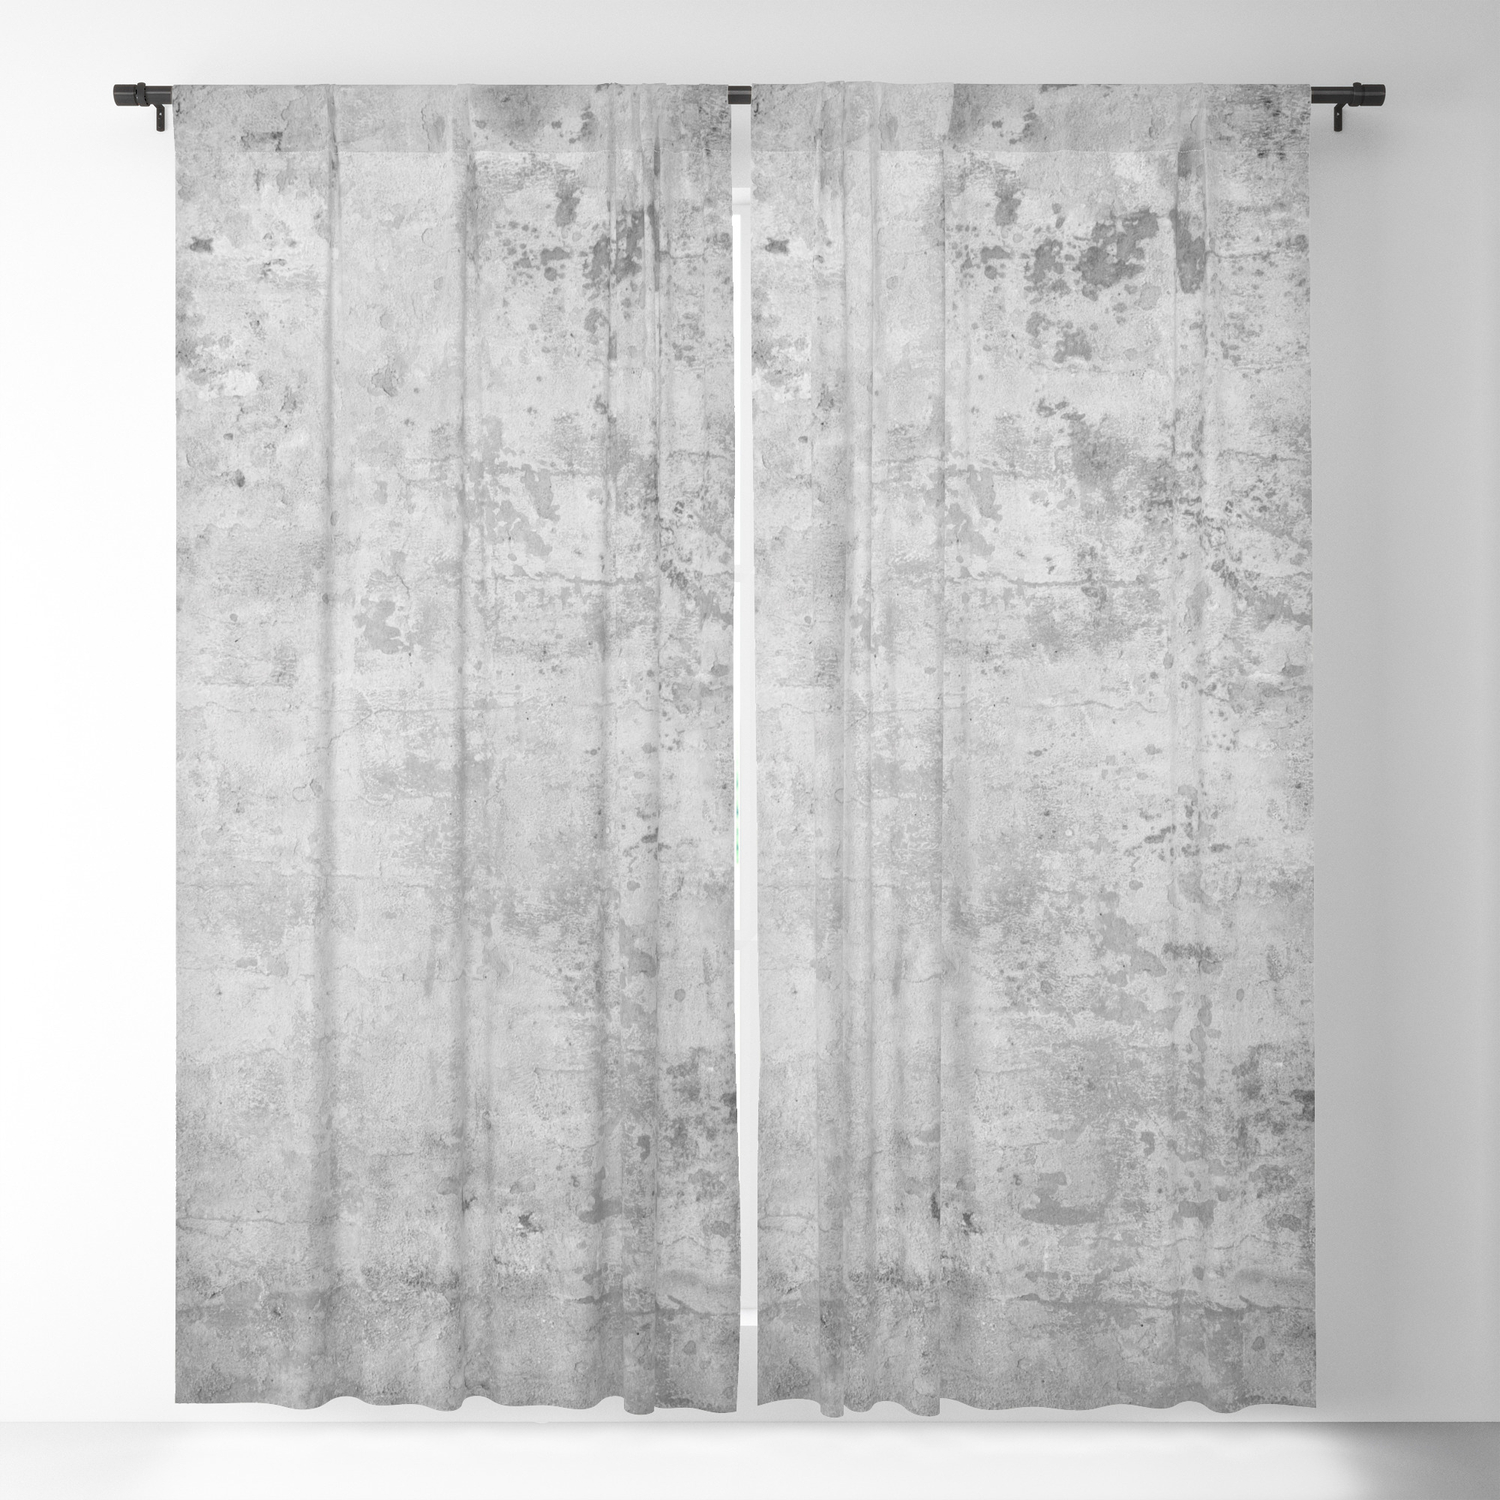 Concrete Wall Vintage Grey Background Wall Texture Blackout Curtain By Ohaniki Society6